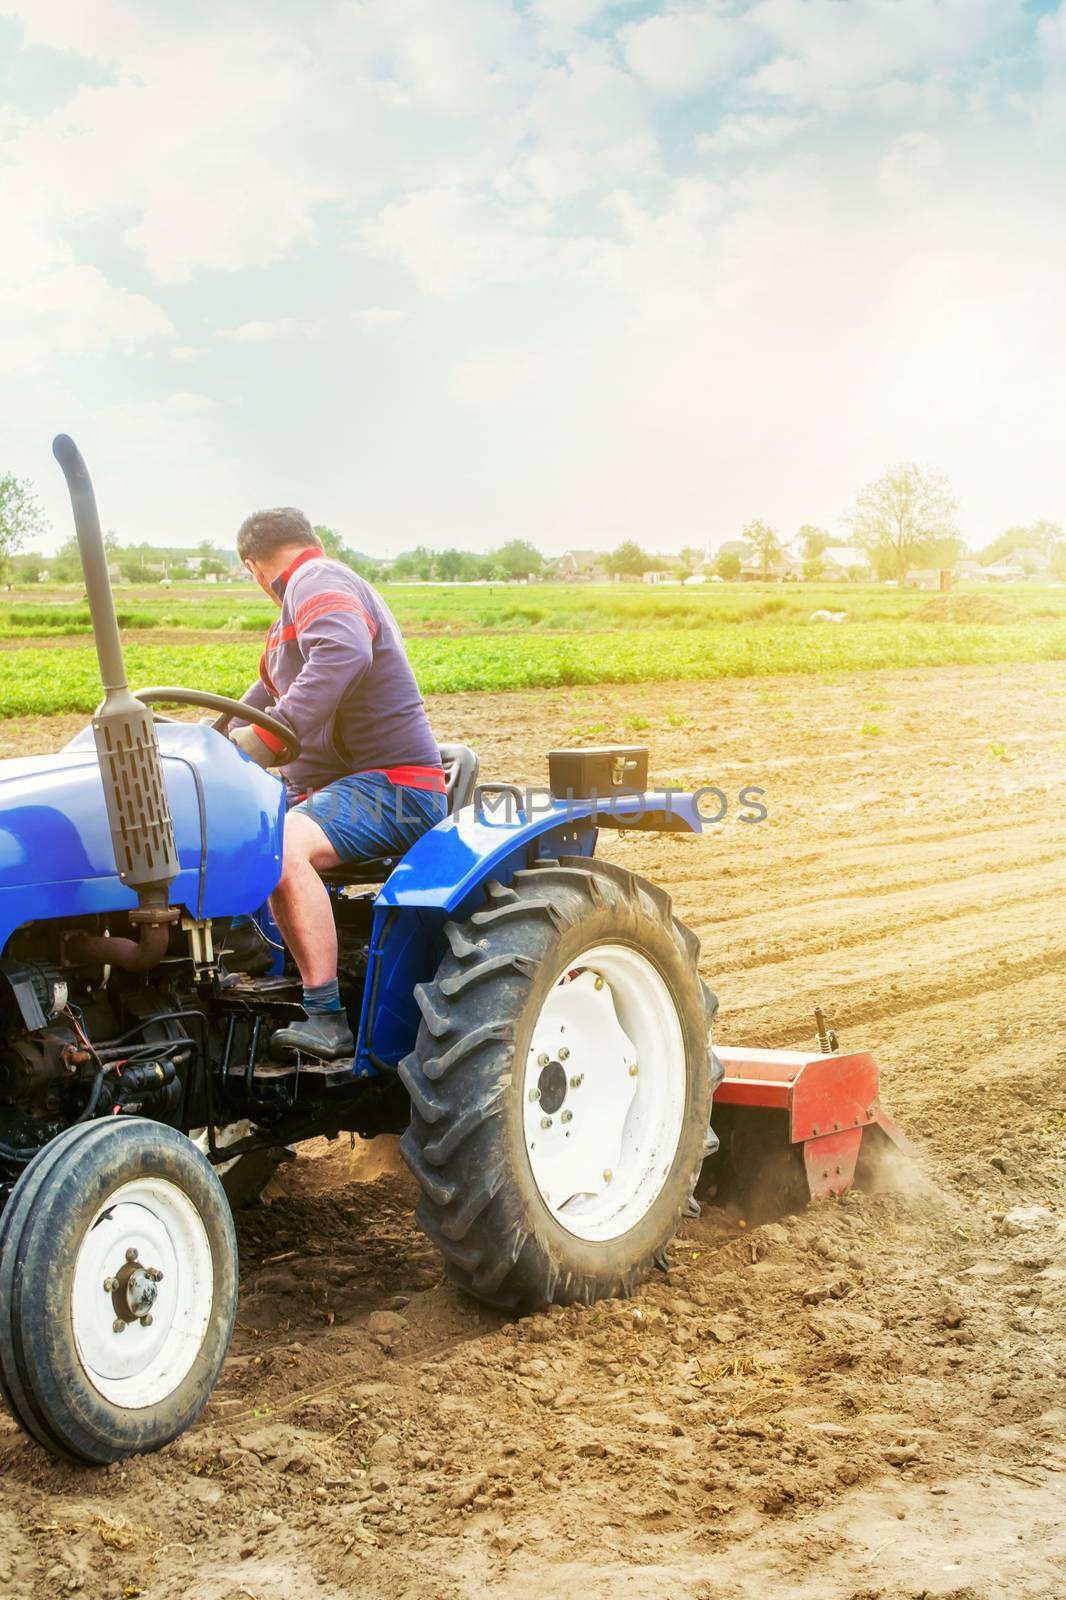 A farmer on a tractor cultivates a farm field. Soil milling, crumbling and mixing. Agriculture, growing organic food vegetables. Loosening the surface, cultivating the land for further planting.